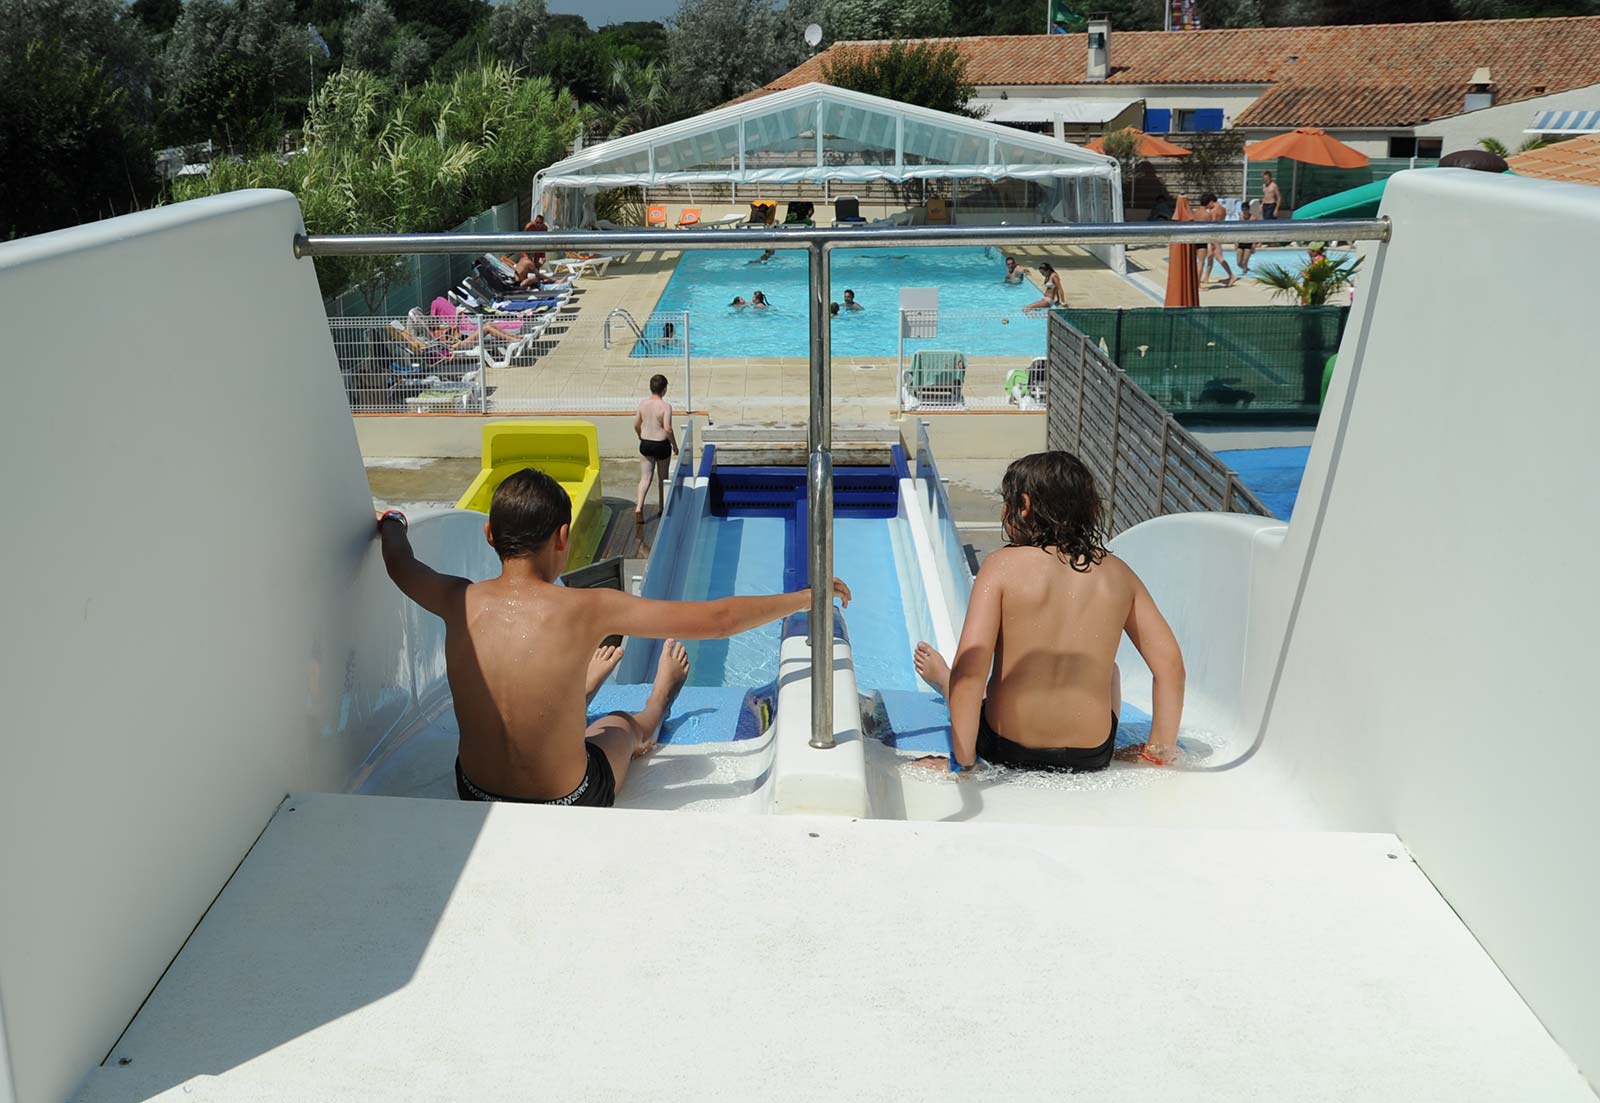 Children at the start of the water slide at the campsite in Oléron